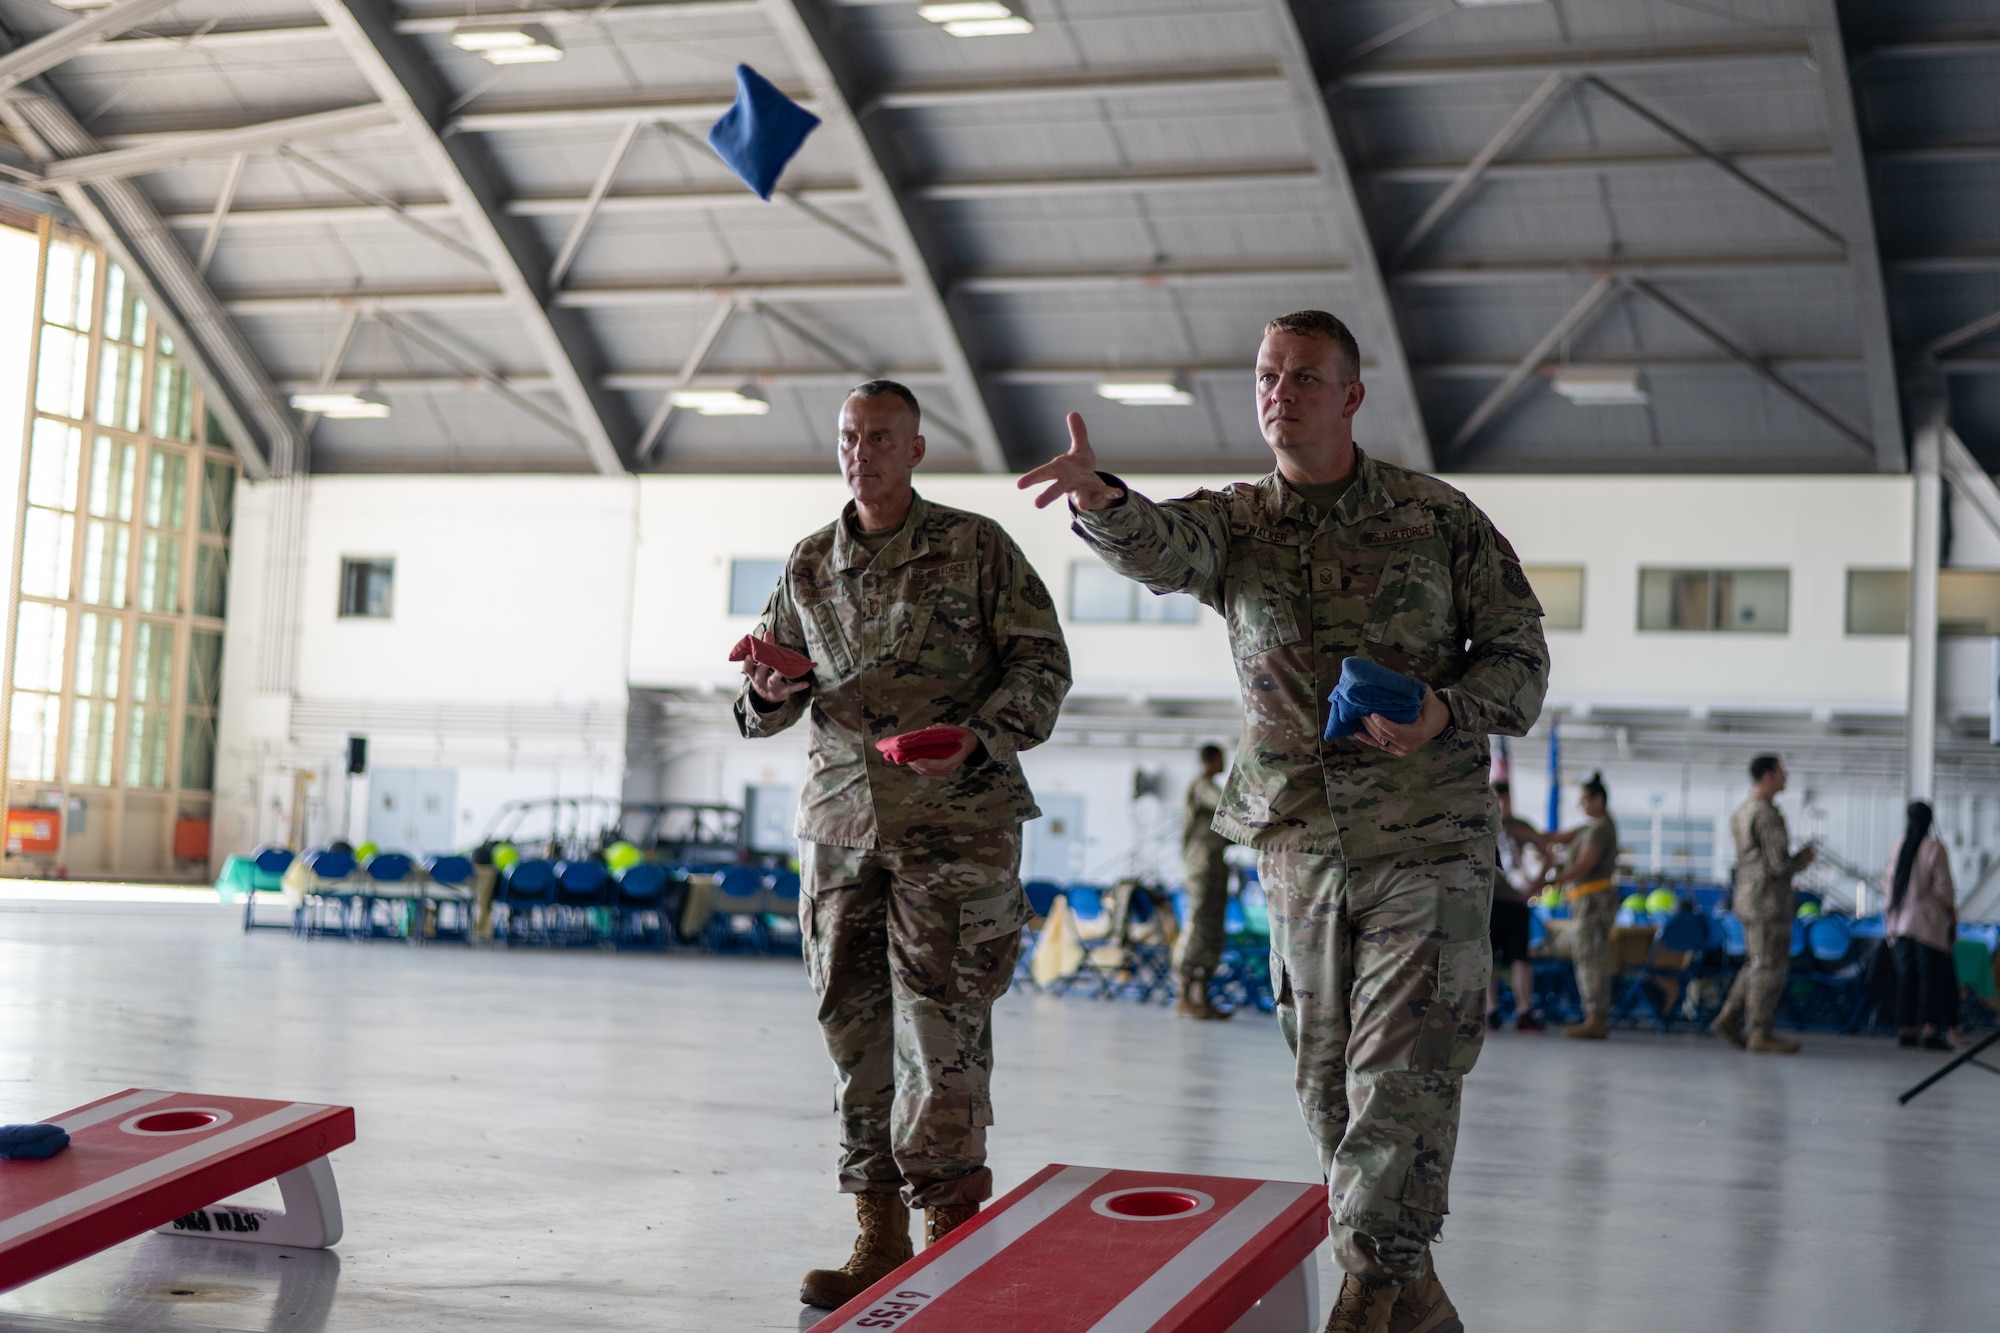 The event served as an opportunity for Airmen and their families to decompress following their recent deployments. (U.S. Air Force photo by Airman 1st Class Zachary Foster)